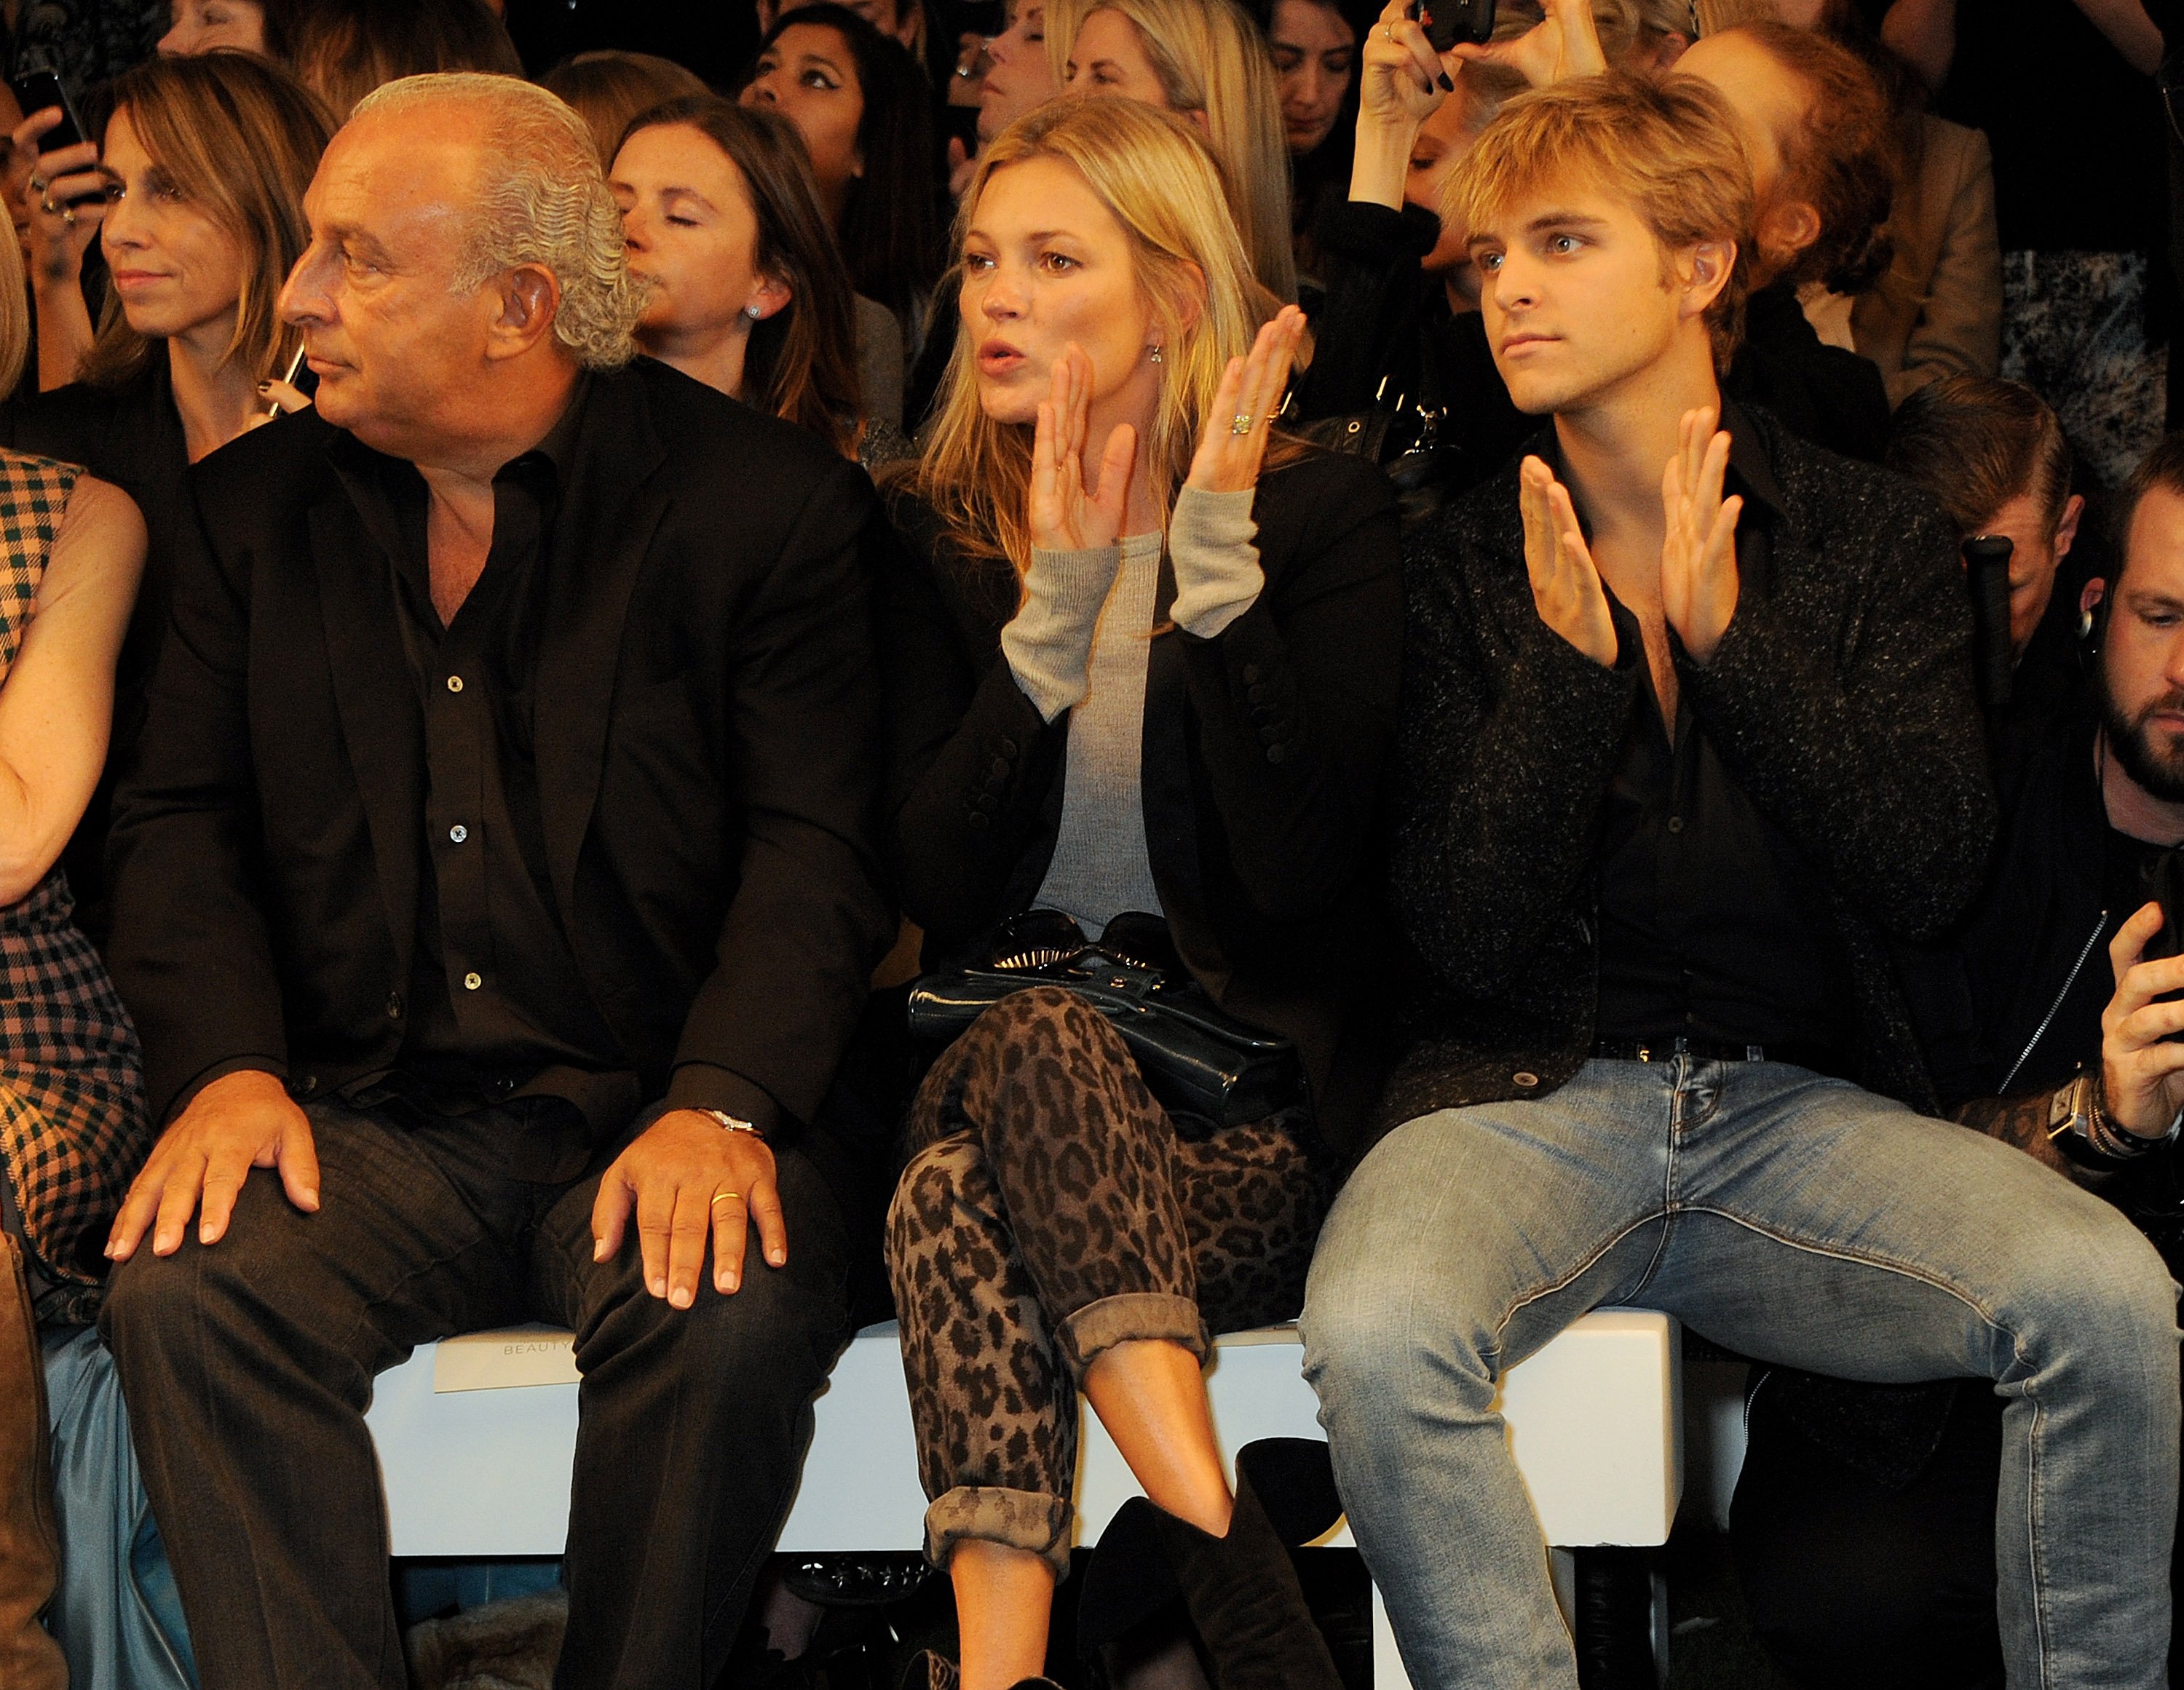 Sir Philip Green, Kate Moss, and Brandon Green at London Fashion Week on September 15, 2013 | Source: Getty Images